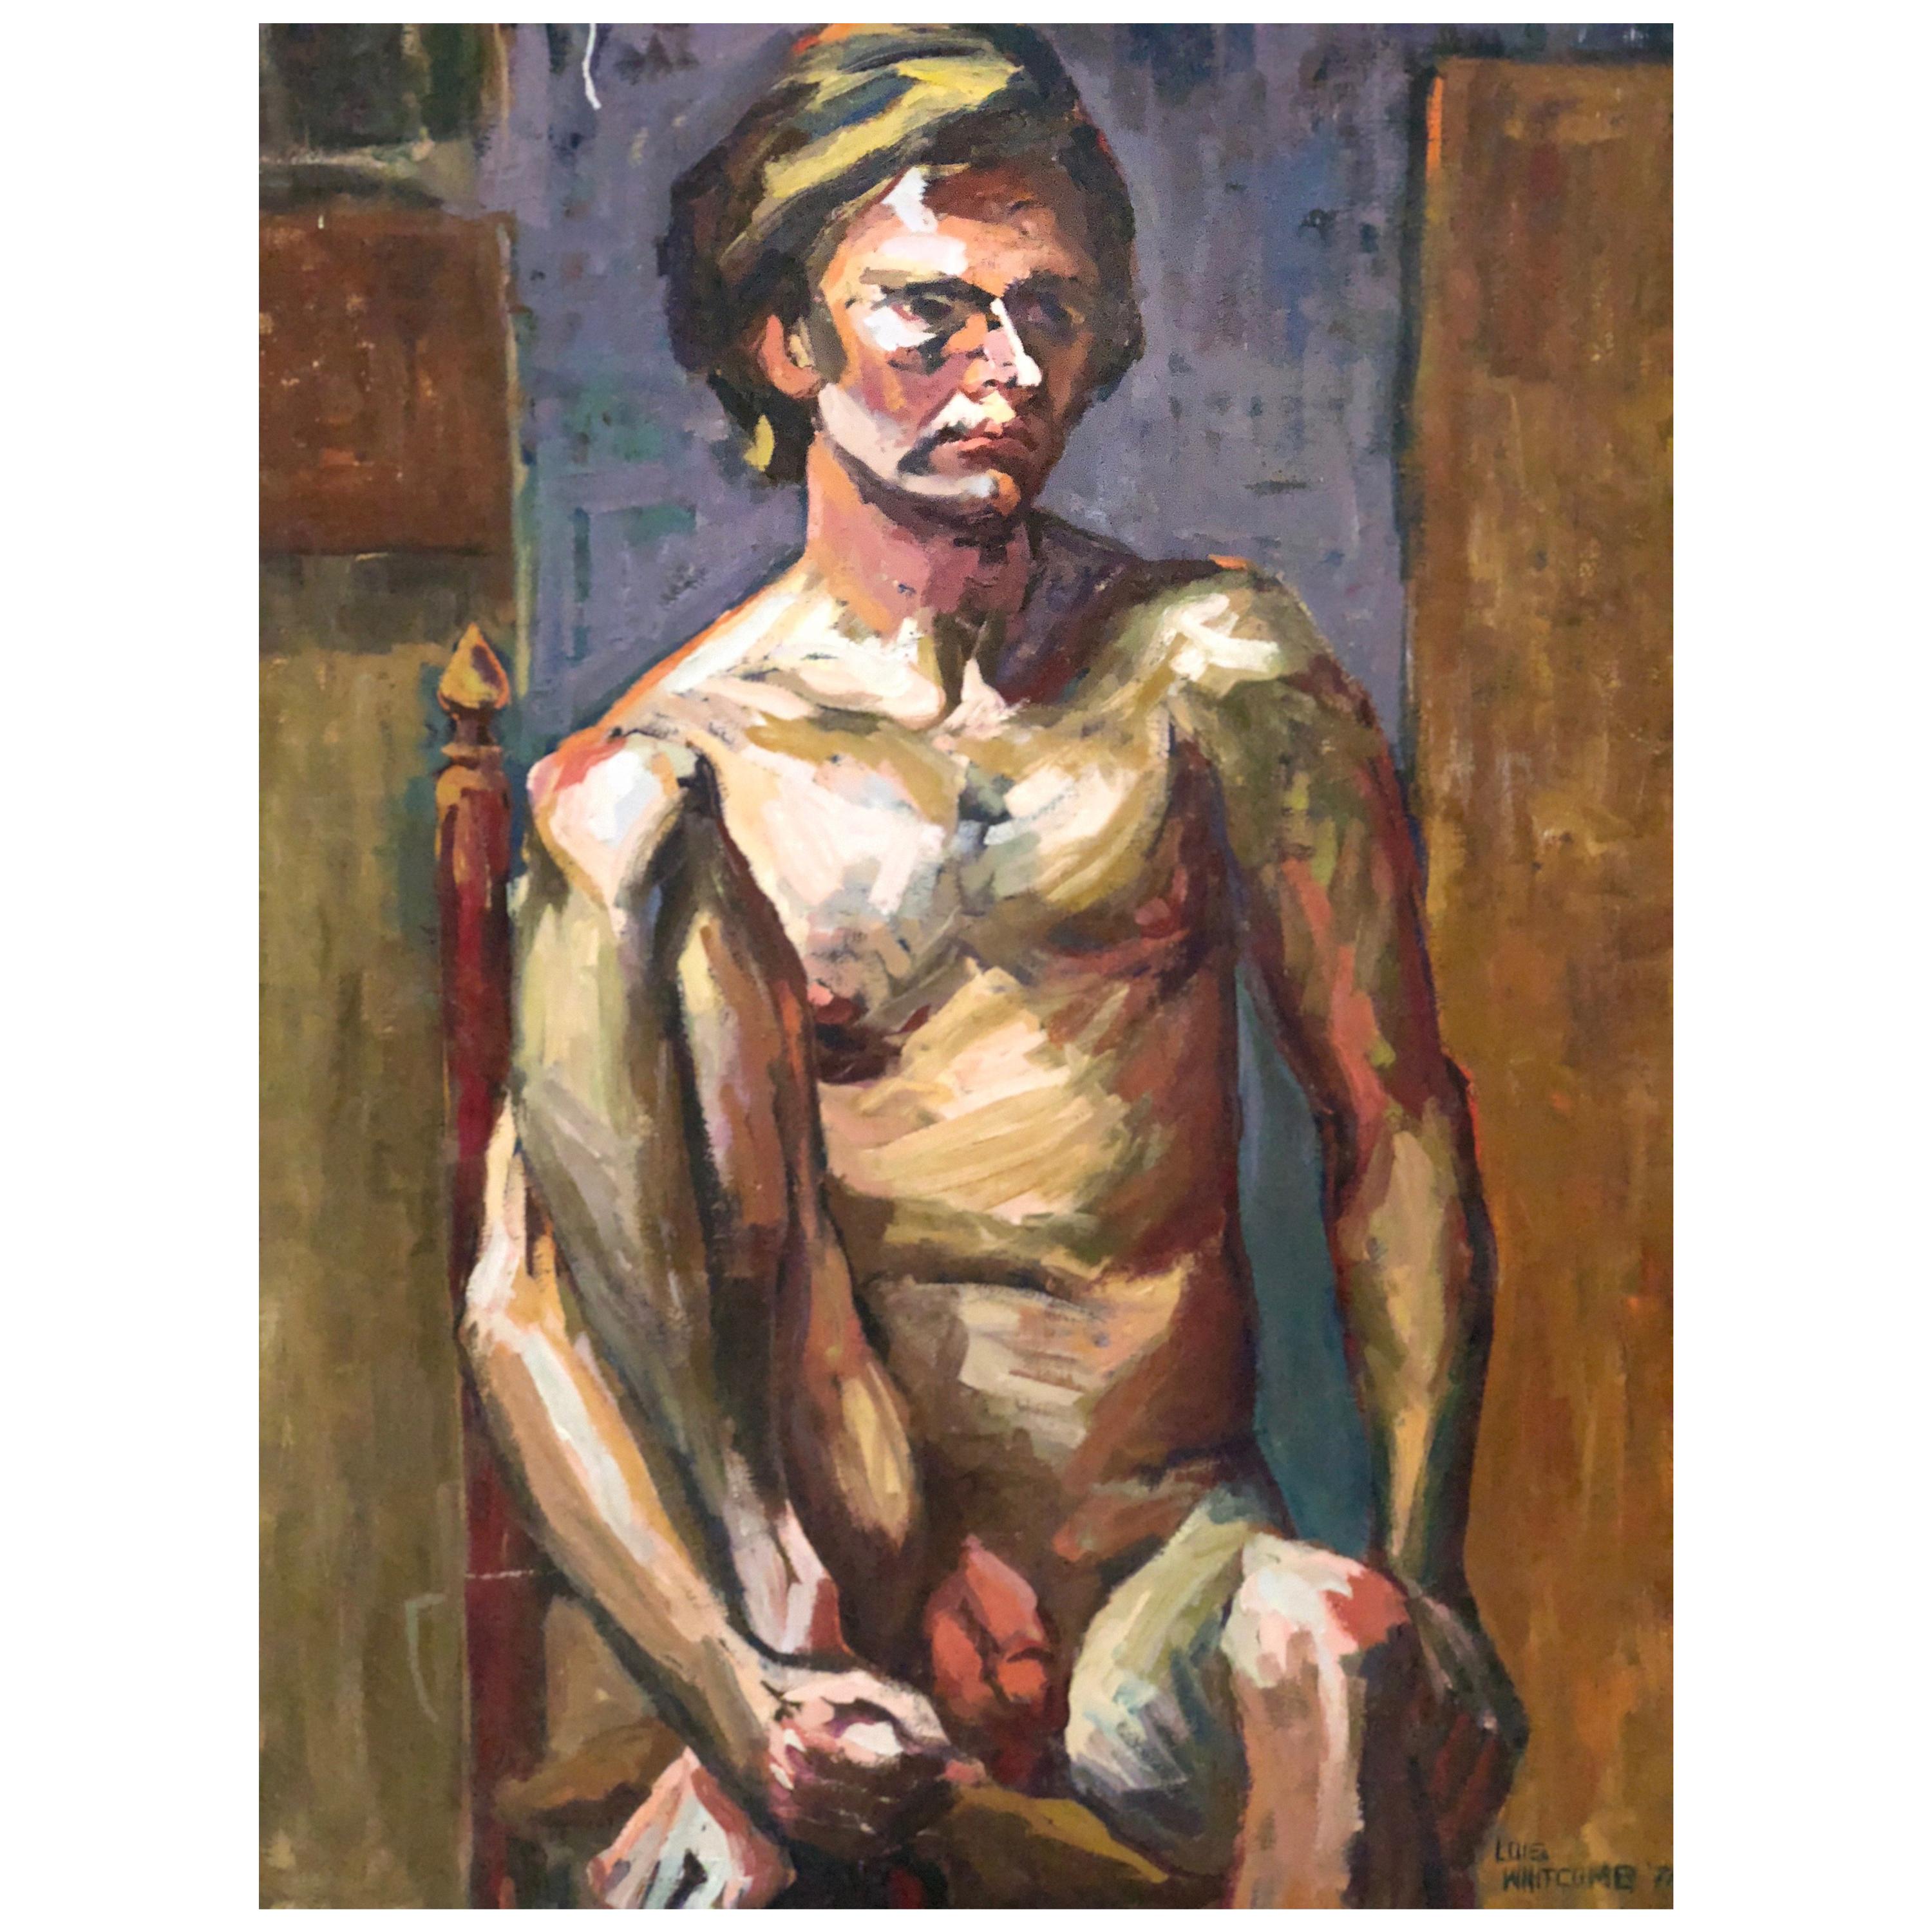 Midcentury Abstract Expressionist Male Nude Portrait by Lois Foley Whitcomb